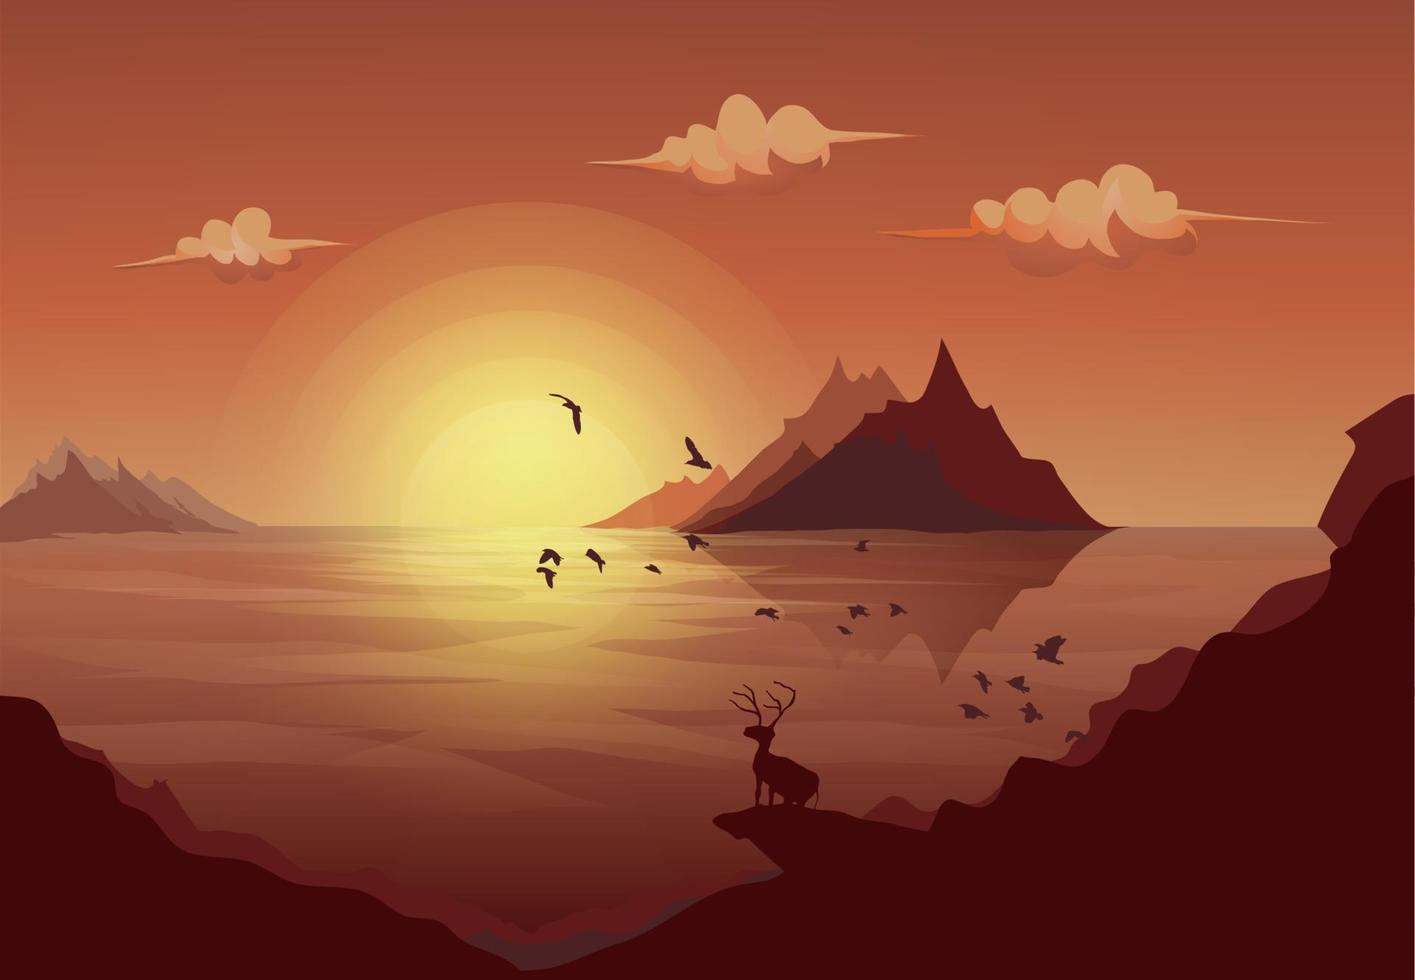 Deer standing on the rock looking at the landscape mountain island sea with sun and cloud along the flock of flying birds vector